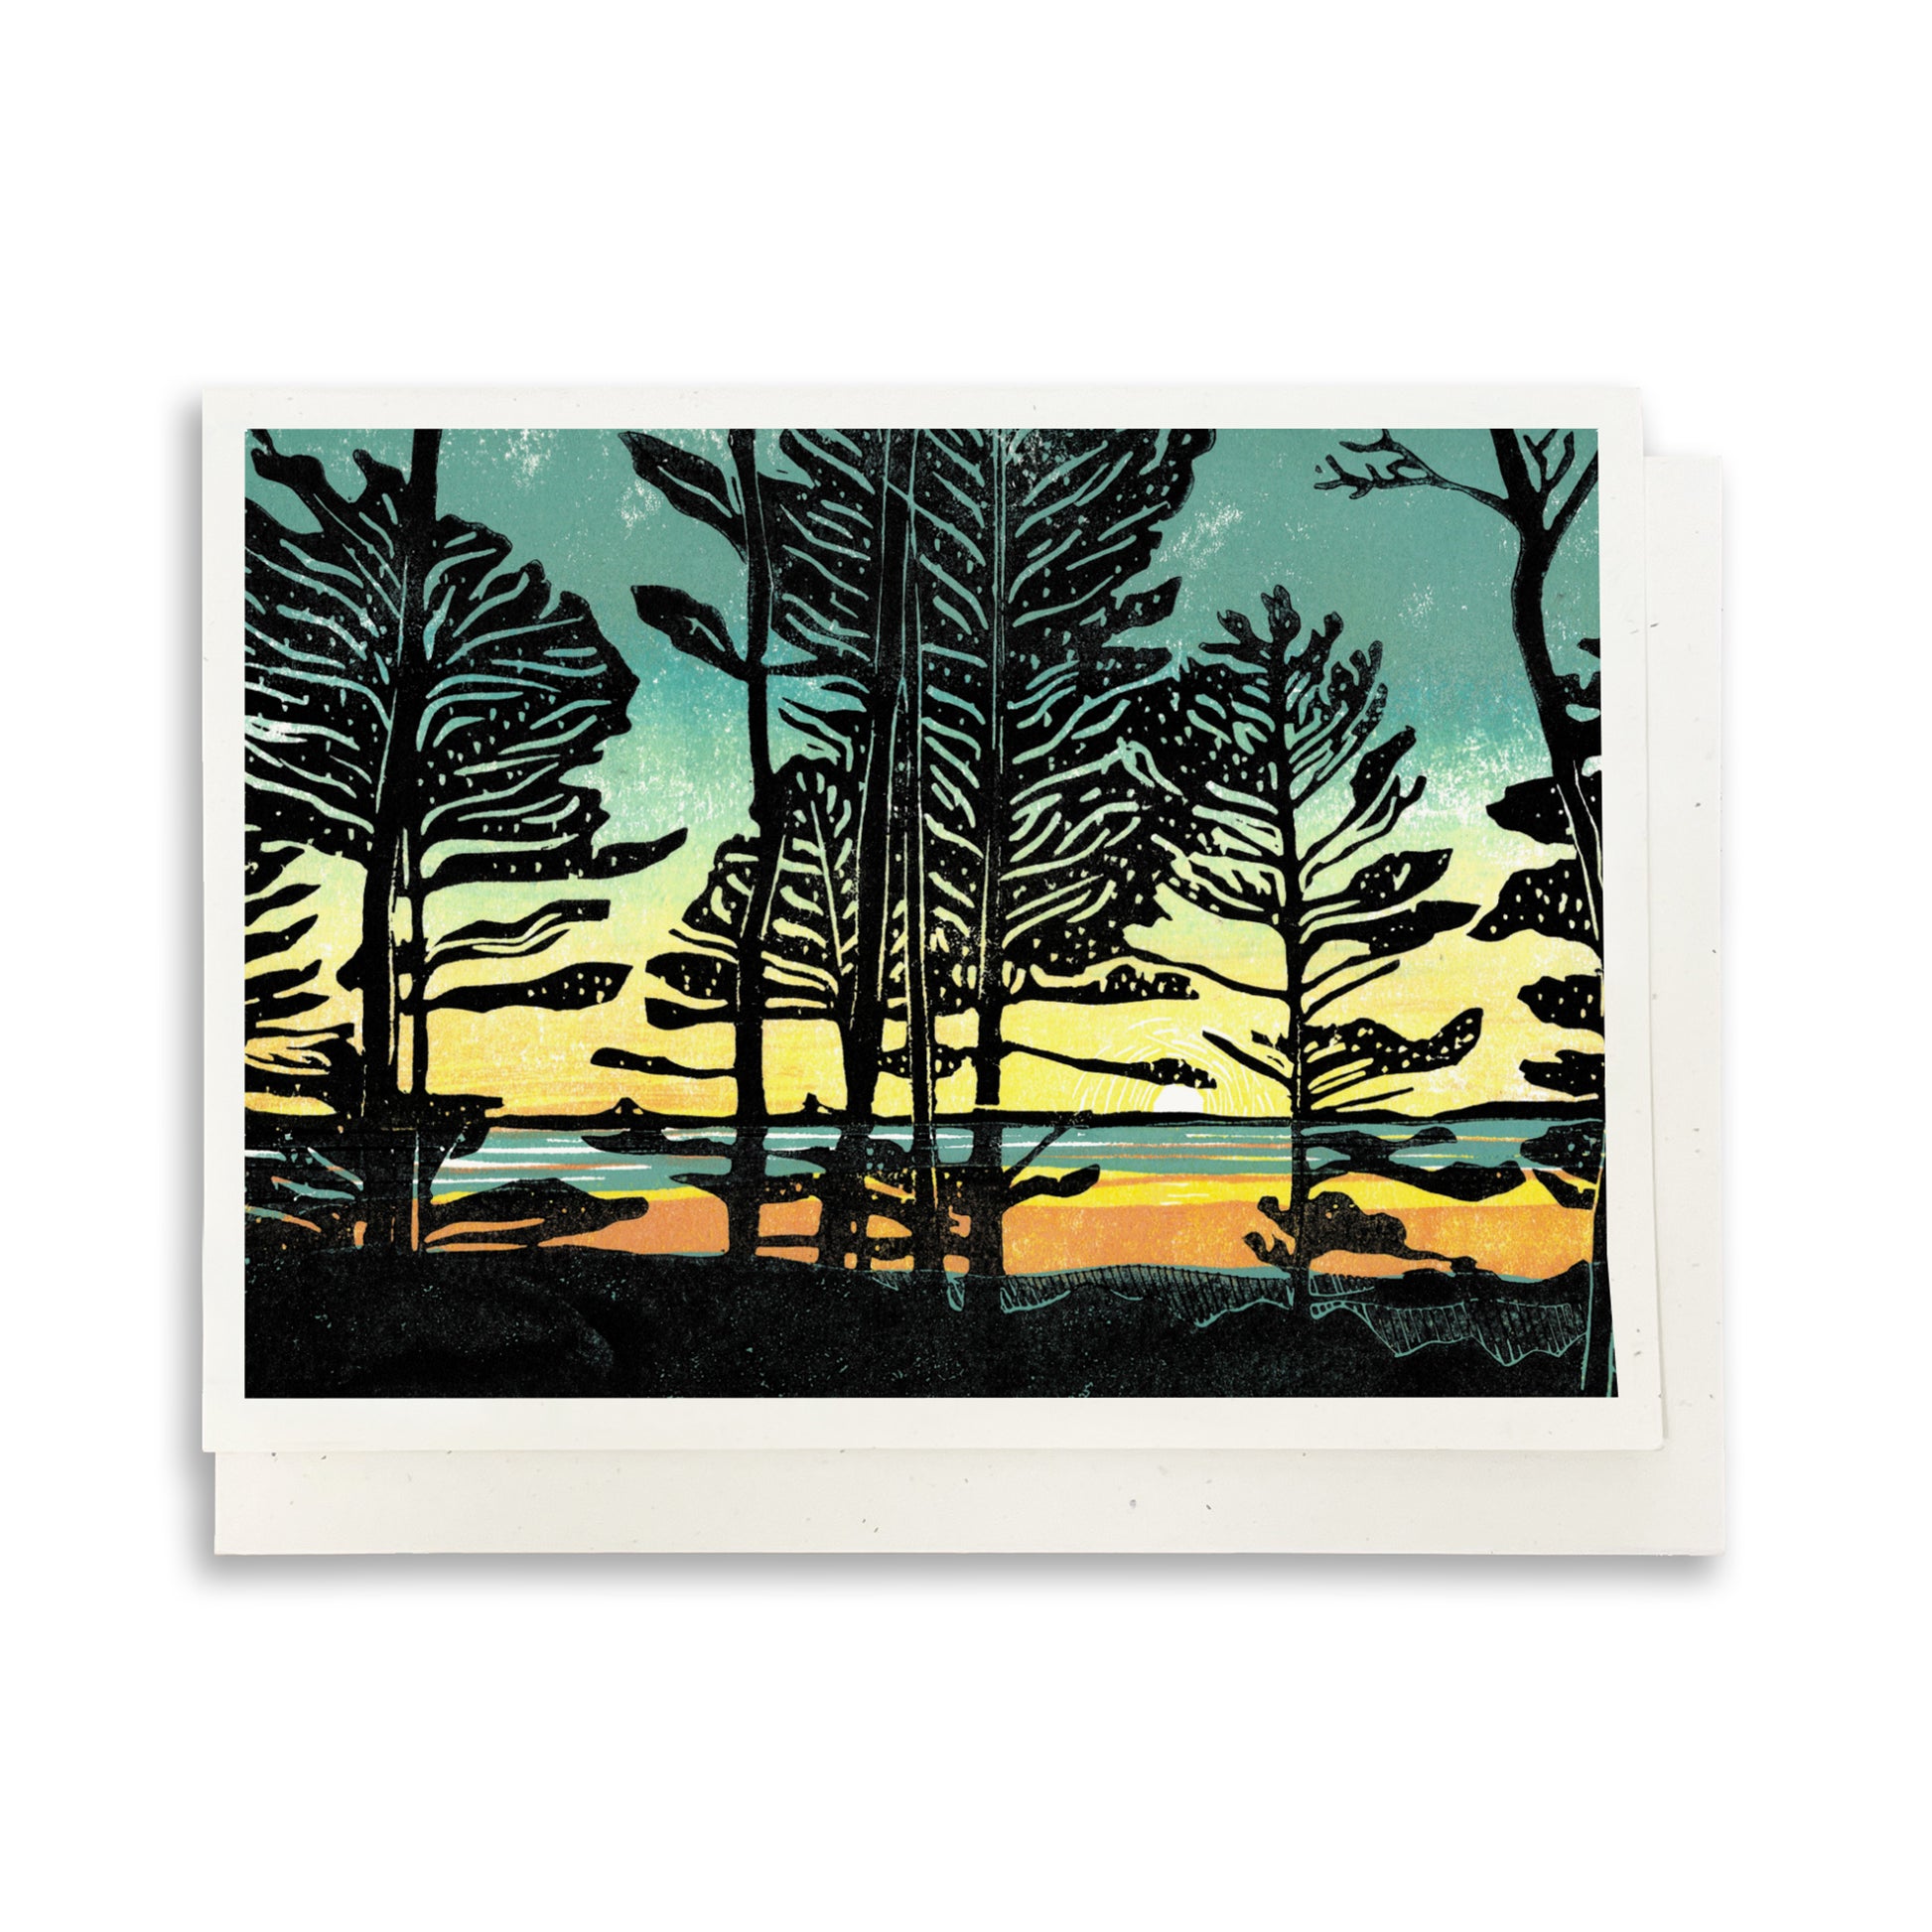 Home. A casually elegant card featuring a digital reproduction of a block print design with the same title by Natalia Wohletz of Peninsula Prints, Milford and Mackinac Island, Michigan.